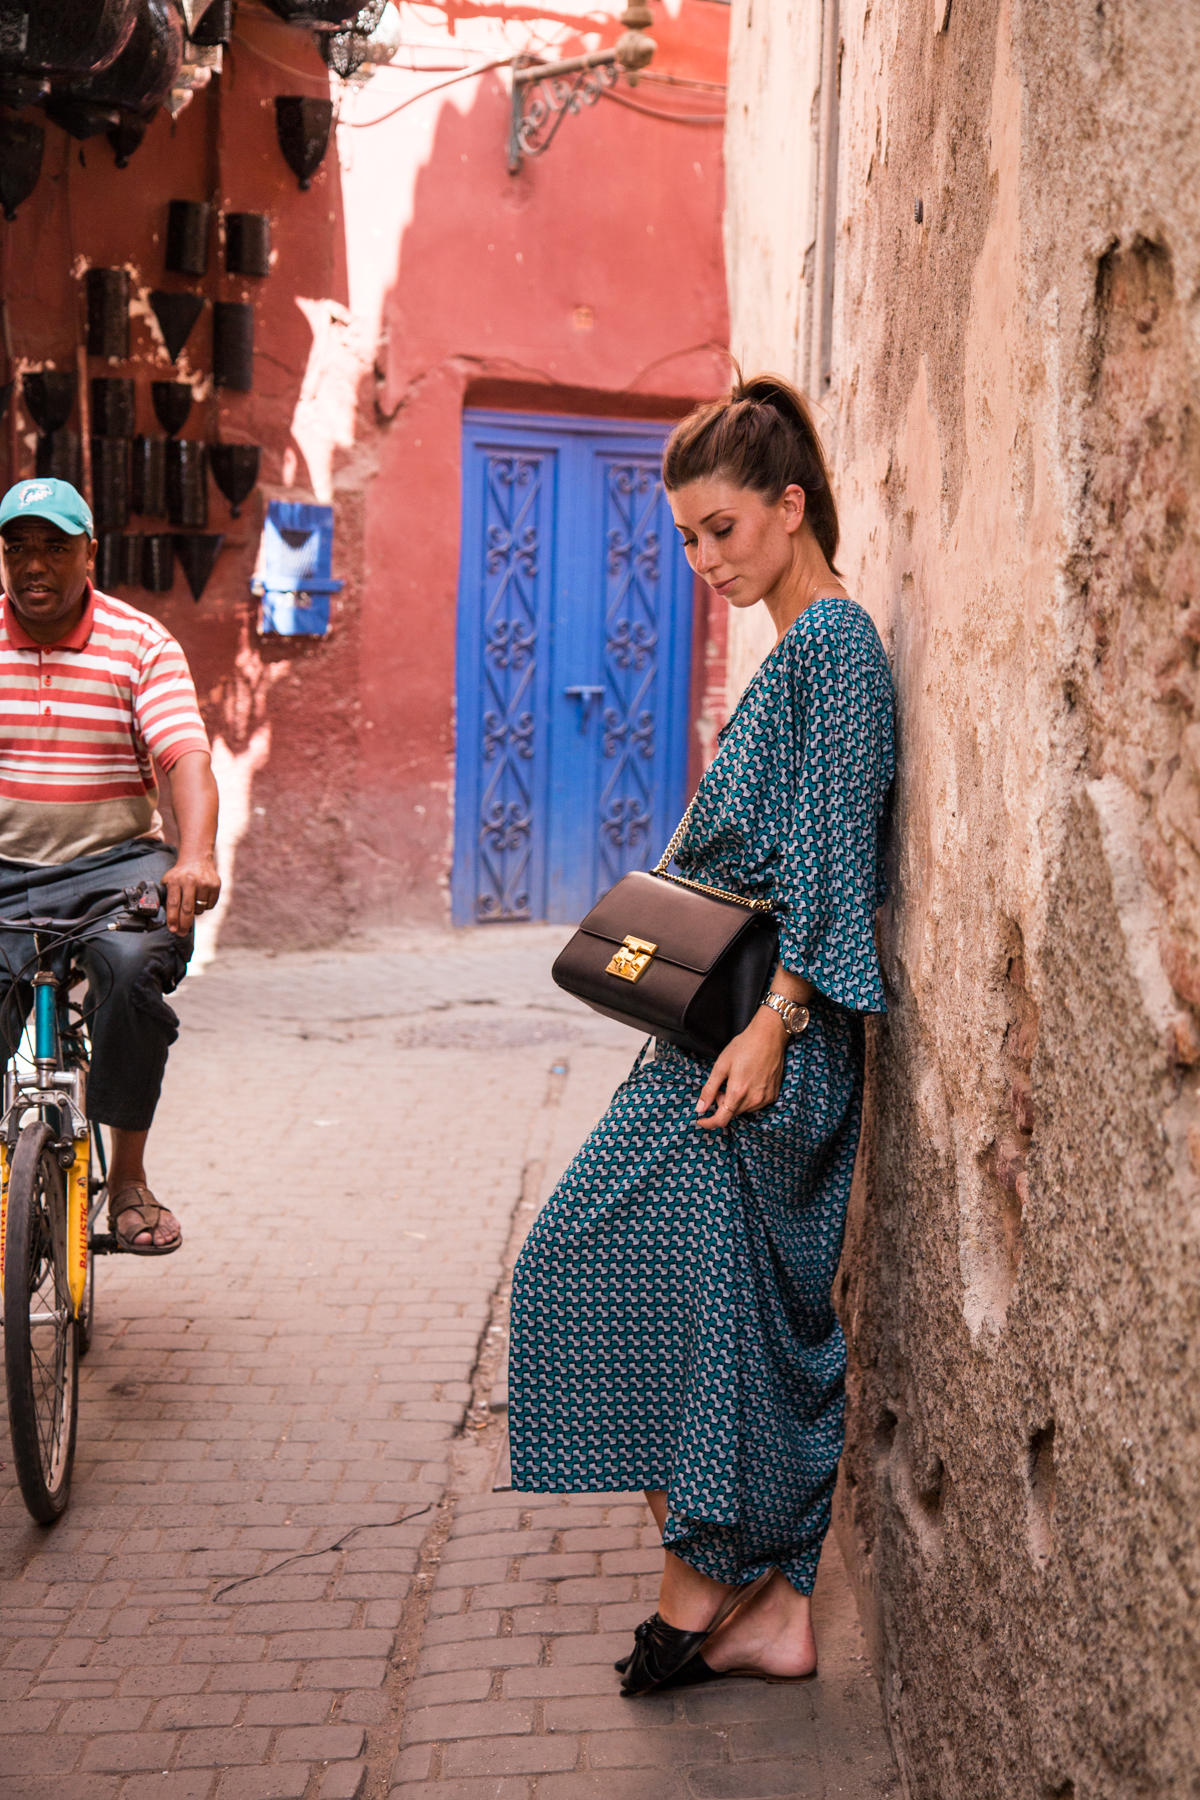 Marrakech Travel Diary | The Daily Dose